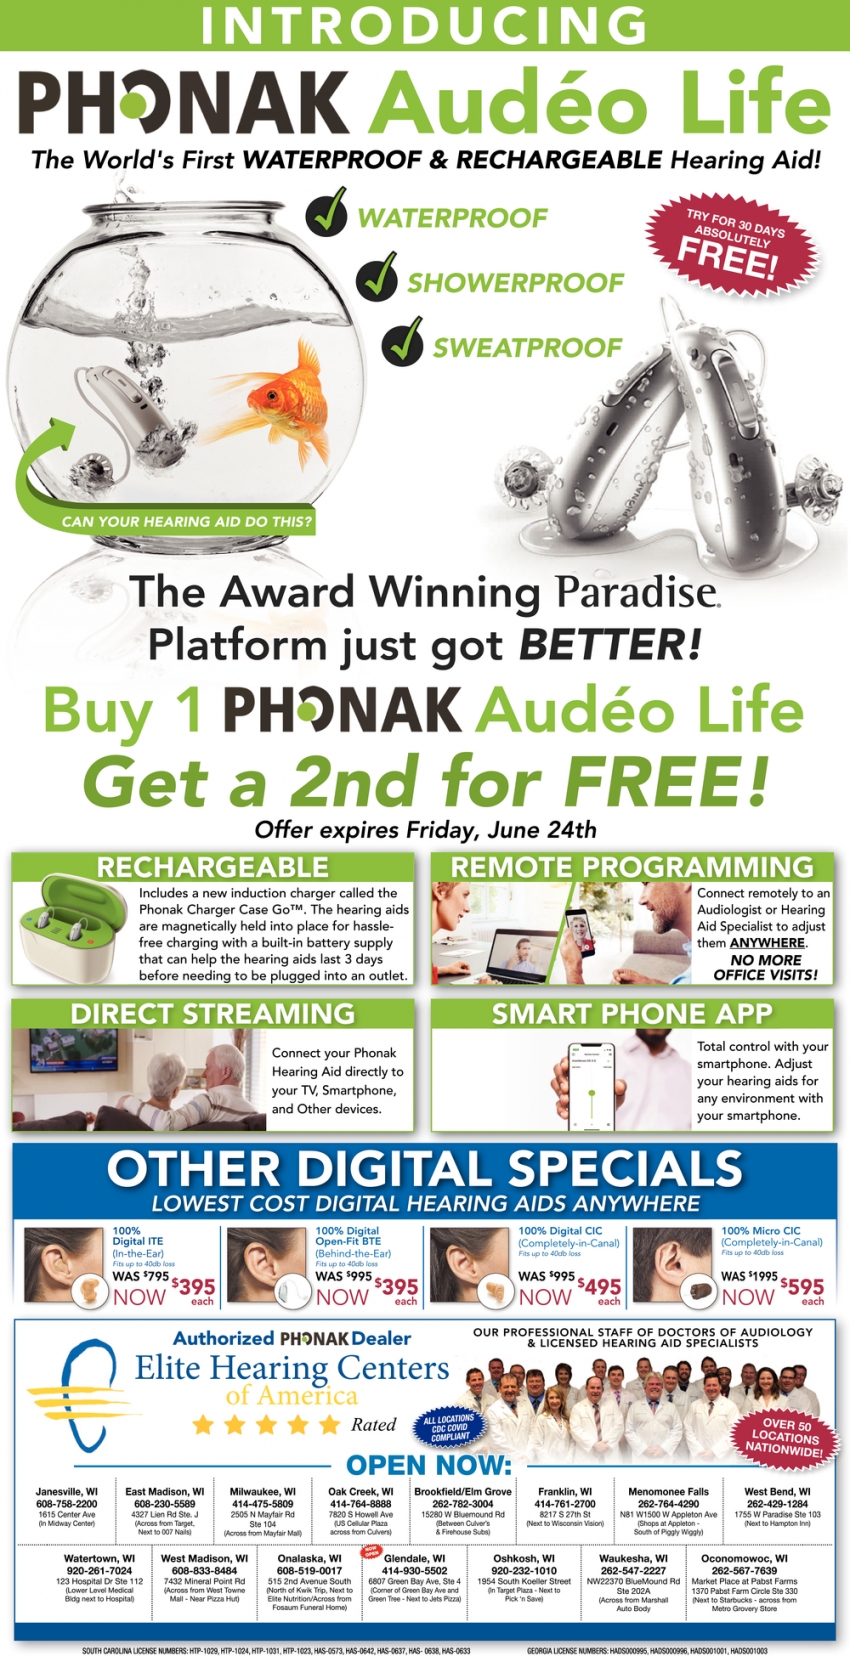 Buy 1 Phonak Audéo Life Get a 2nd for FREE!